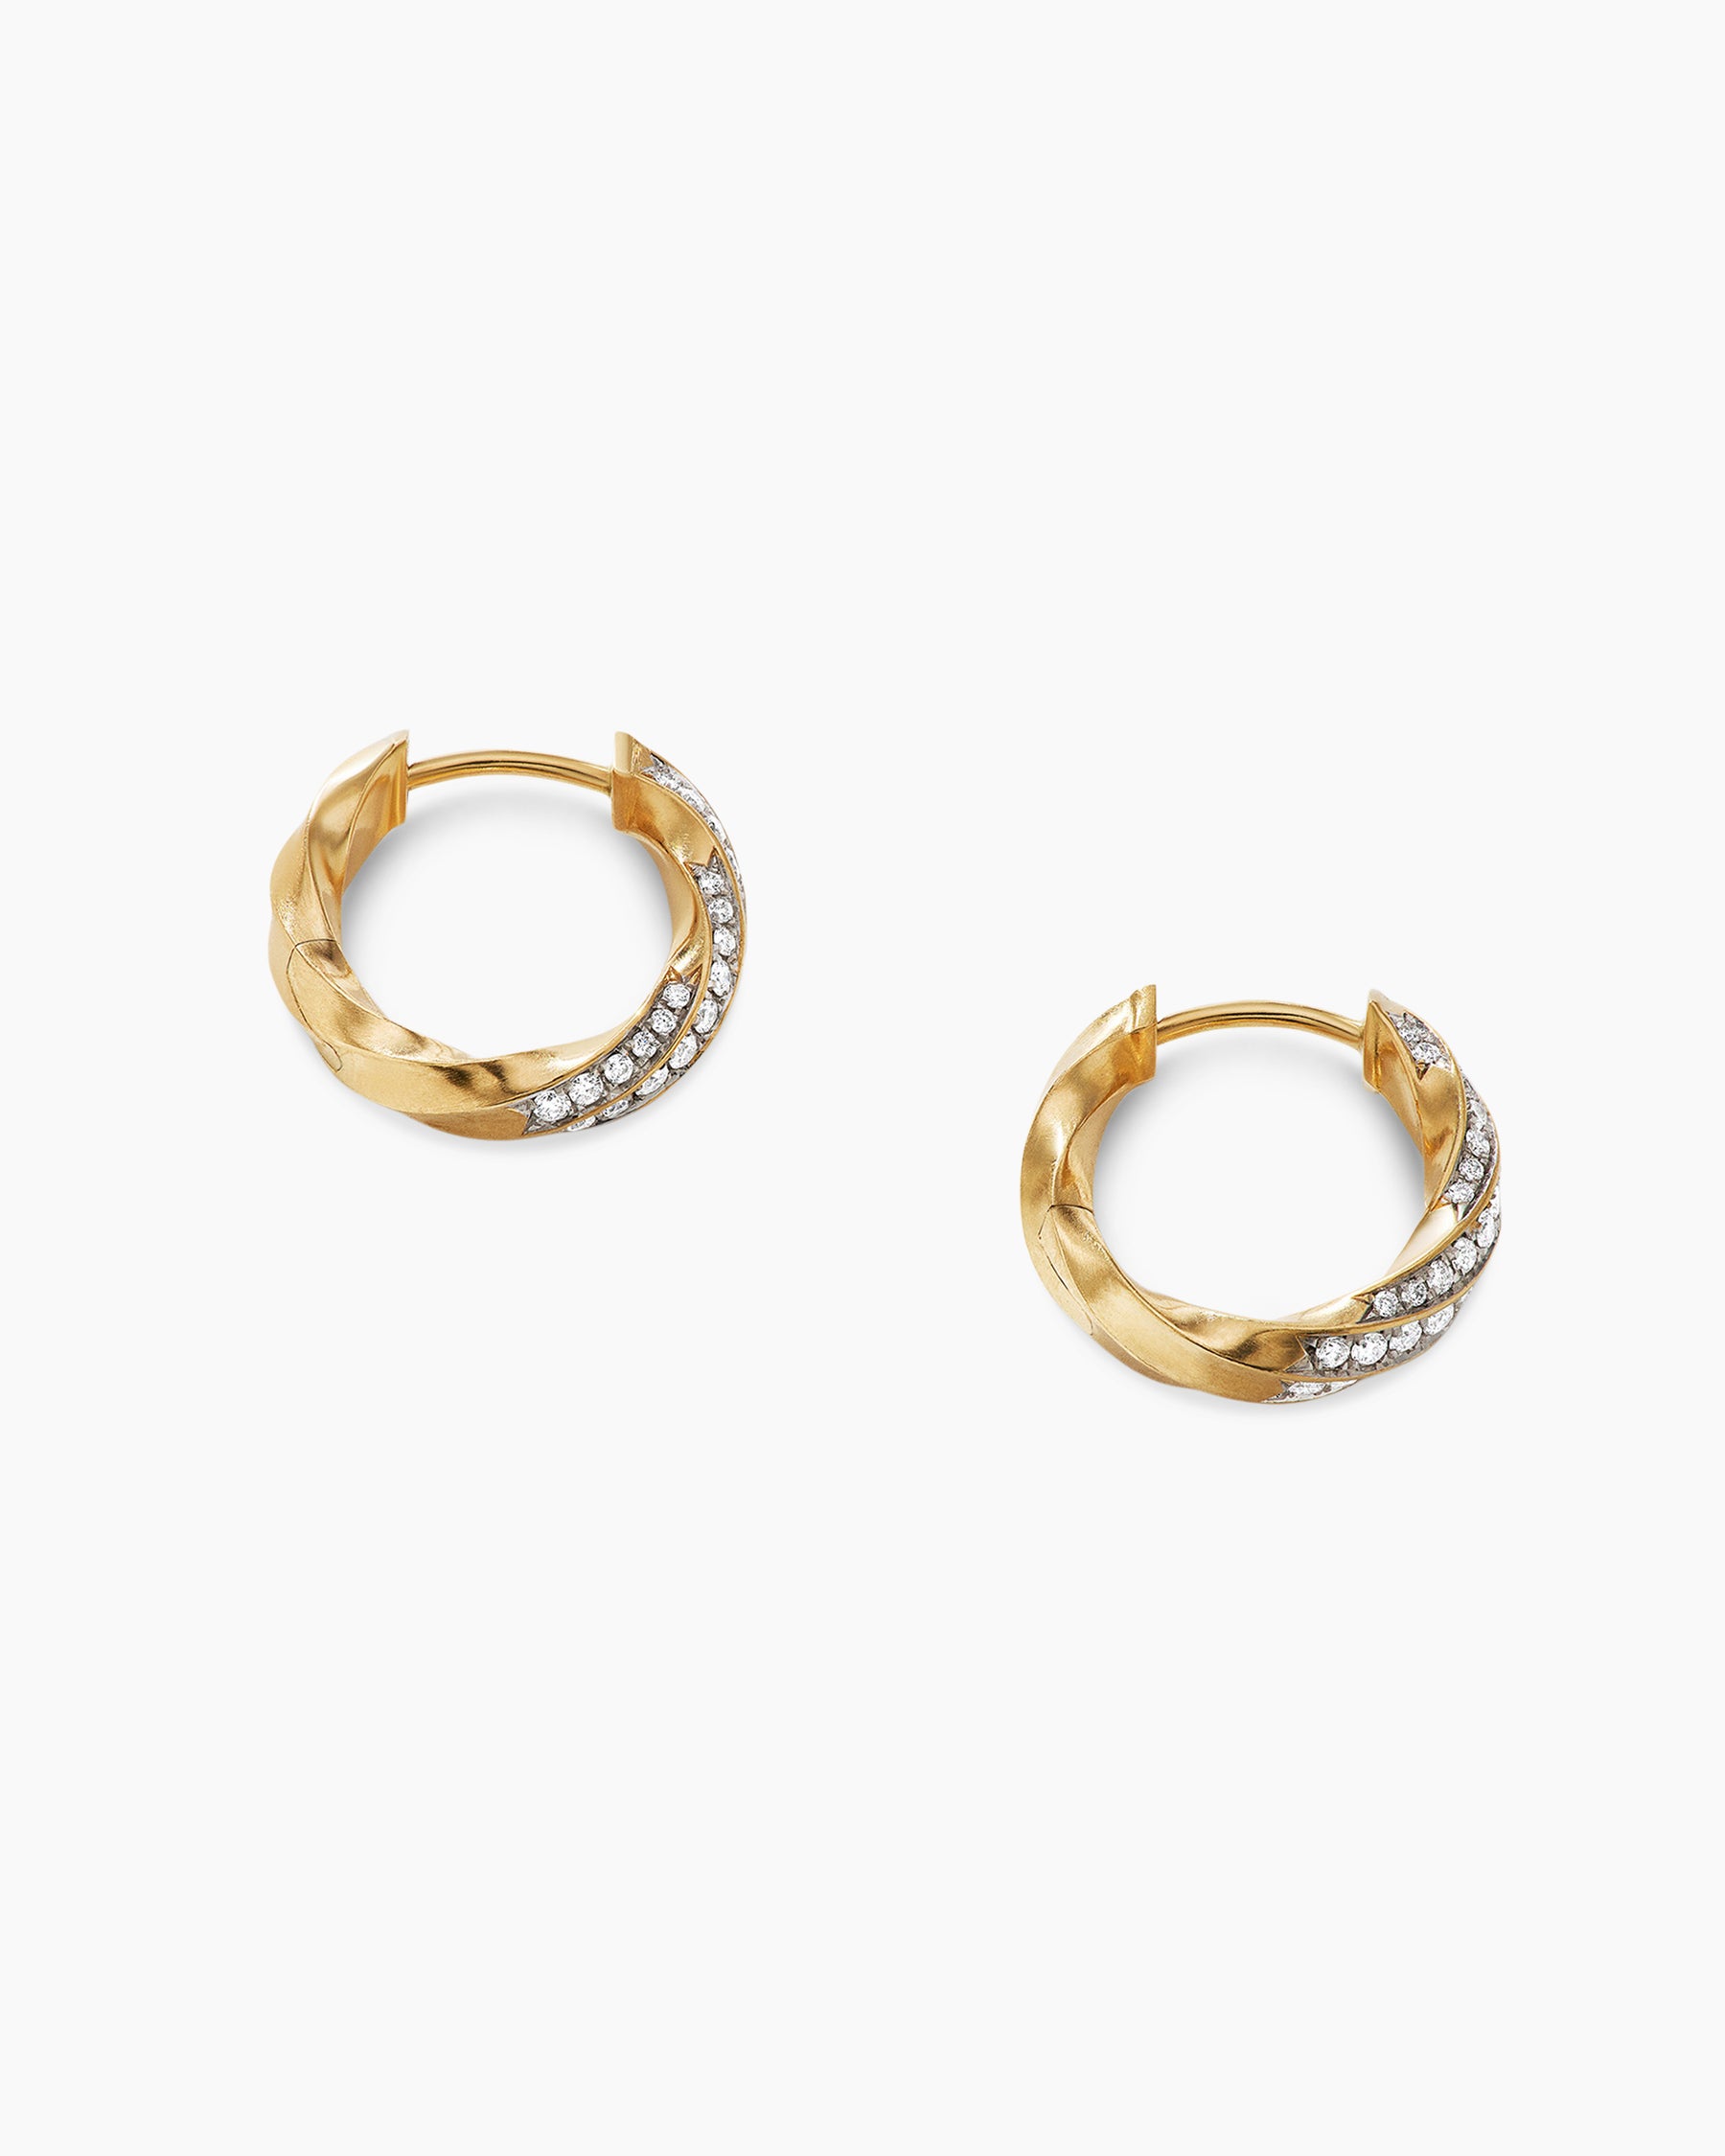 Cable Edge® Huggie Hoop Earrings in 18K Yellow Gold with Diamonds, 13mm